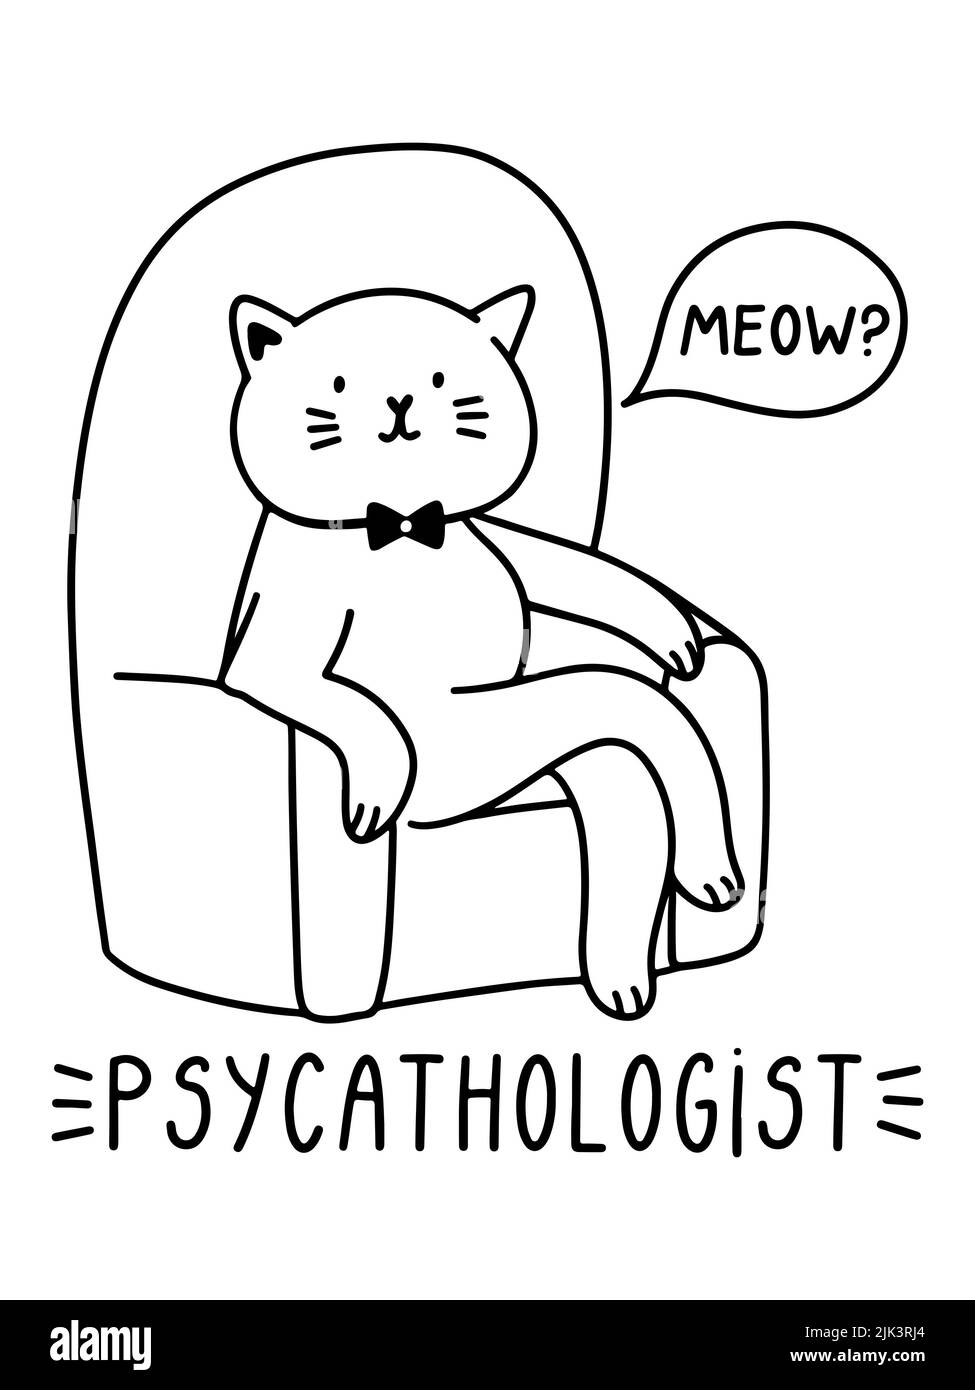 Psycathologist funny illustration with cat. Friendship between humans and animals concept. Stock Photo